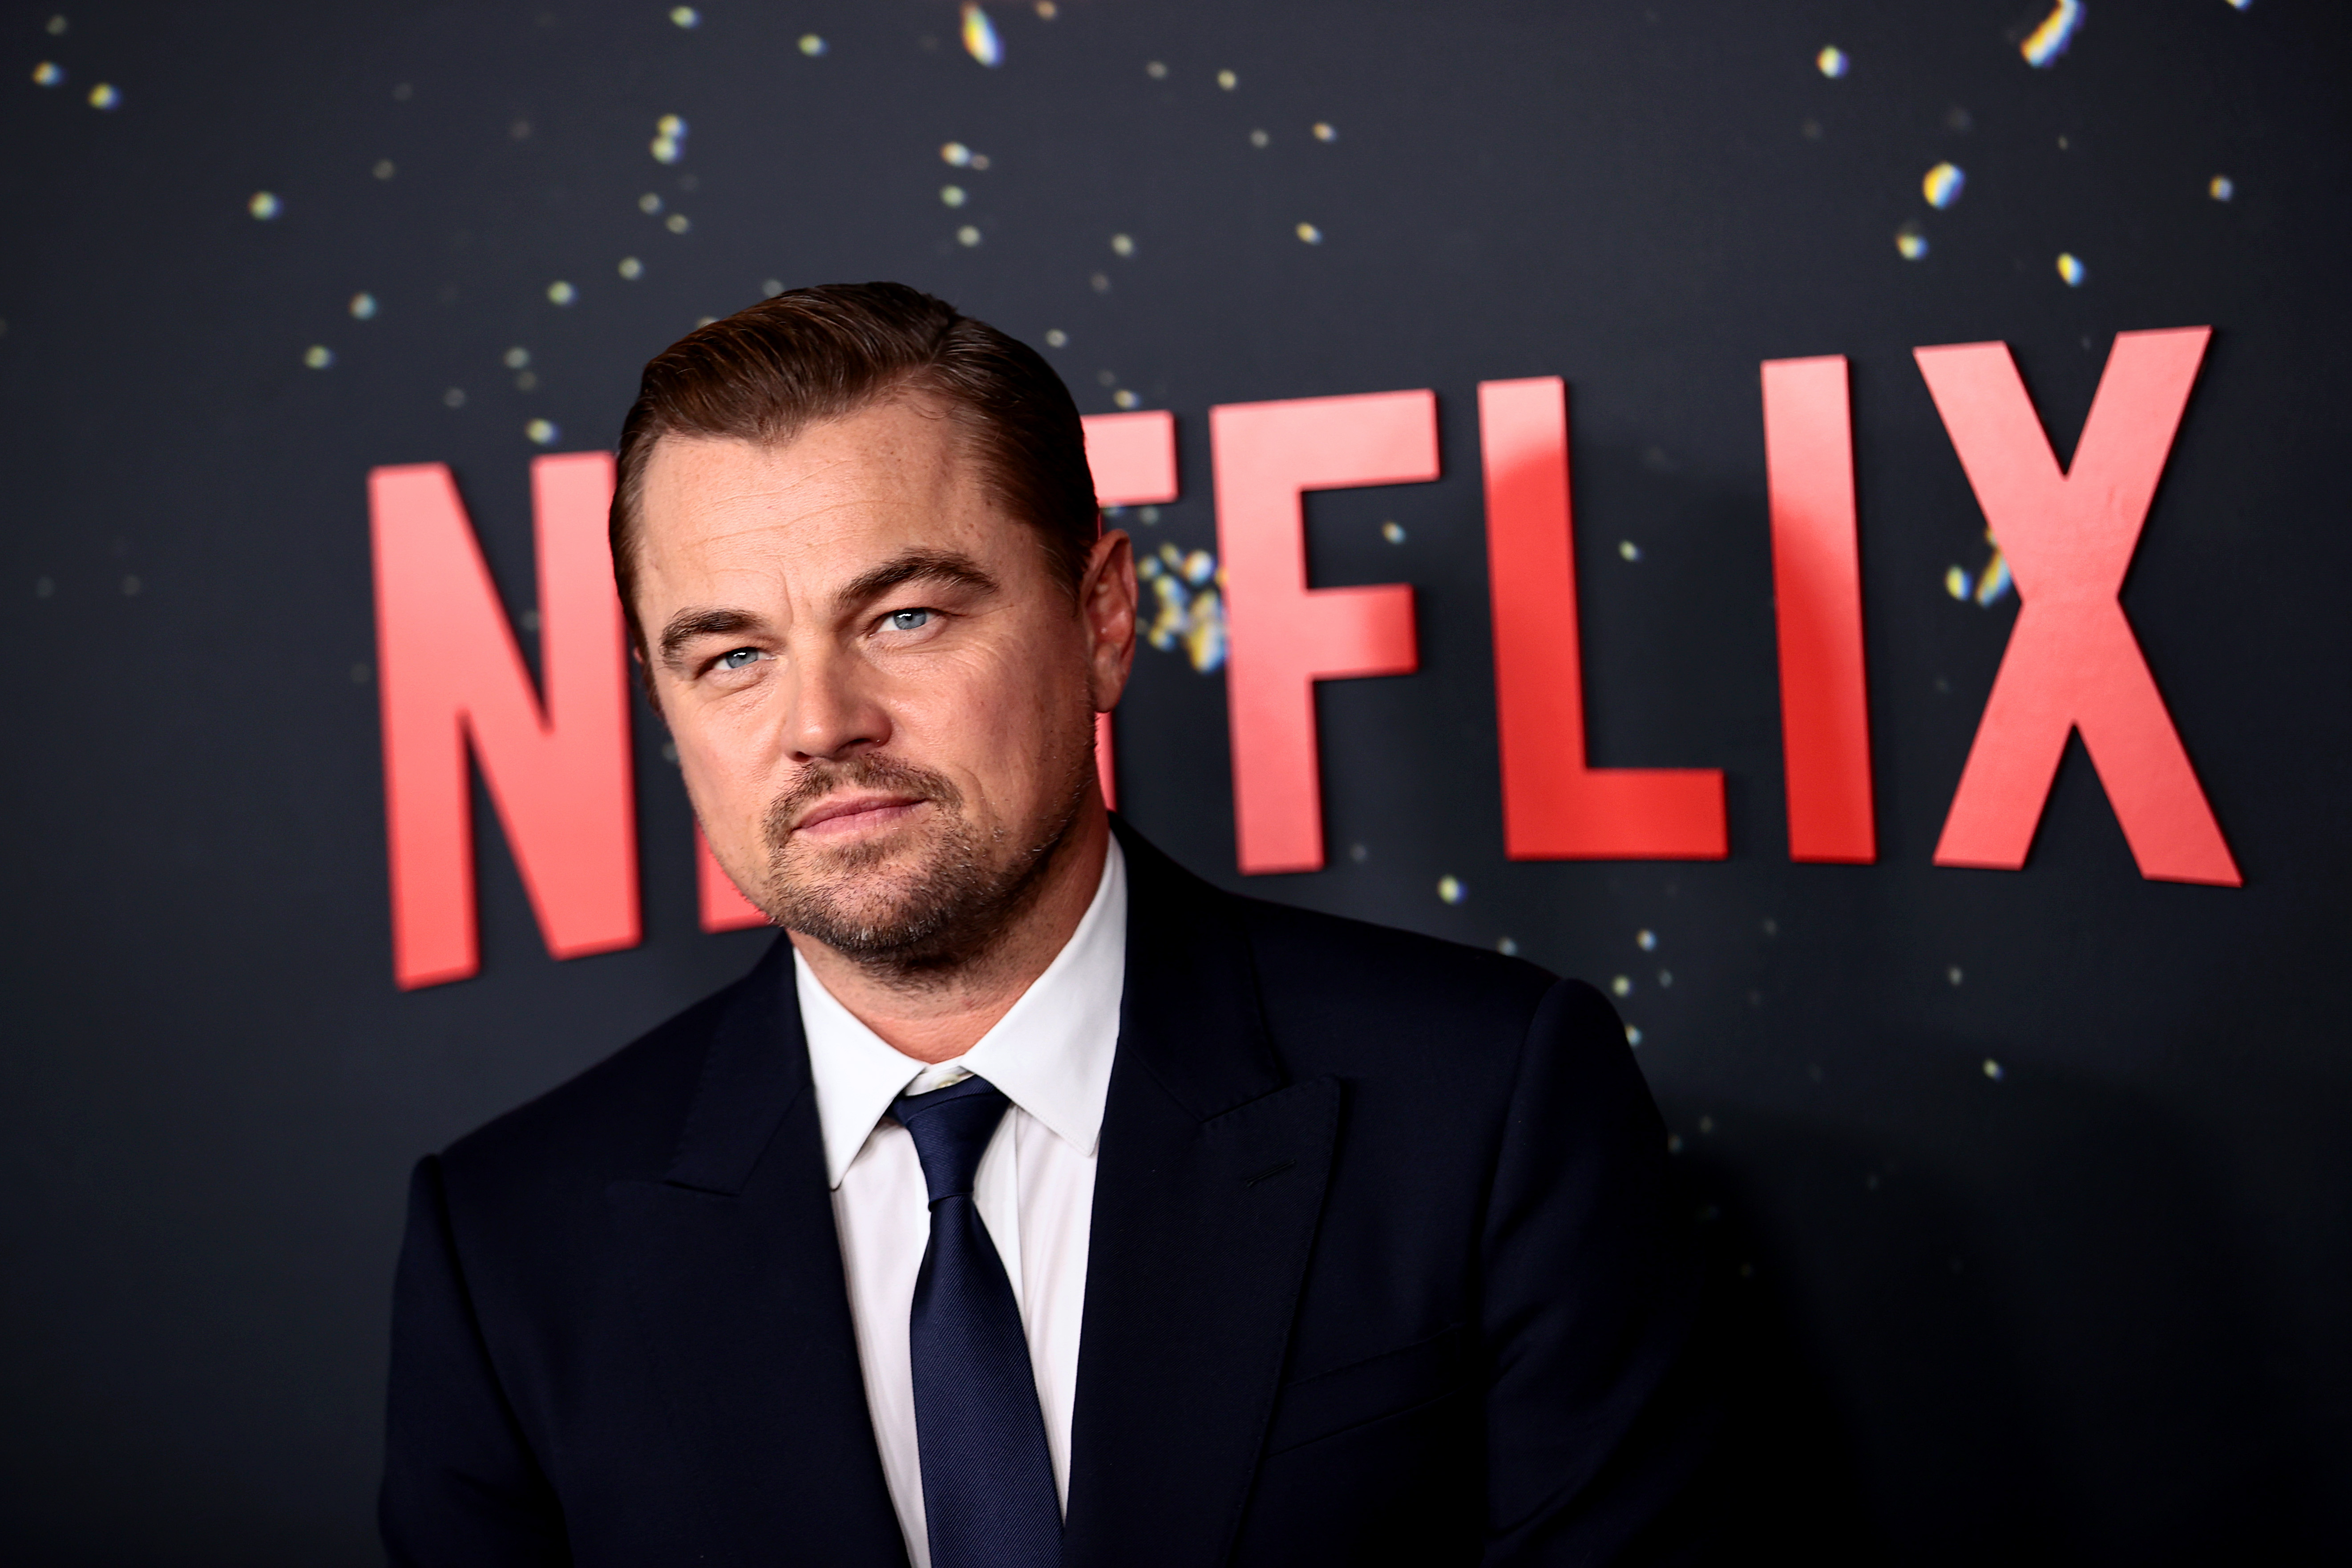 Leonardo DiCaprio attends the "Don't Look Up" World Premiere at Jazz at Lincoln Center on December 05, 2021 in New York City. 